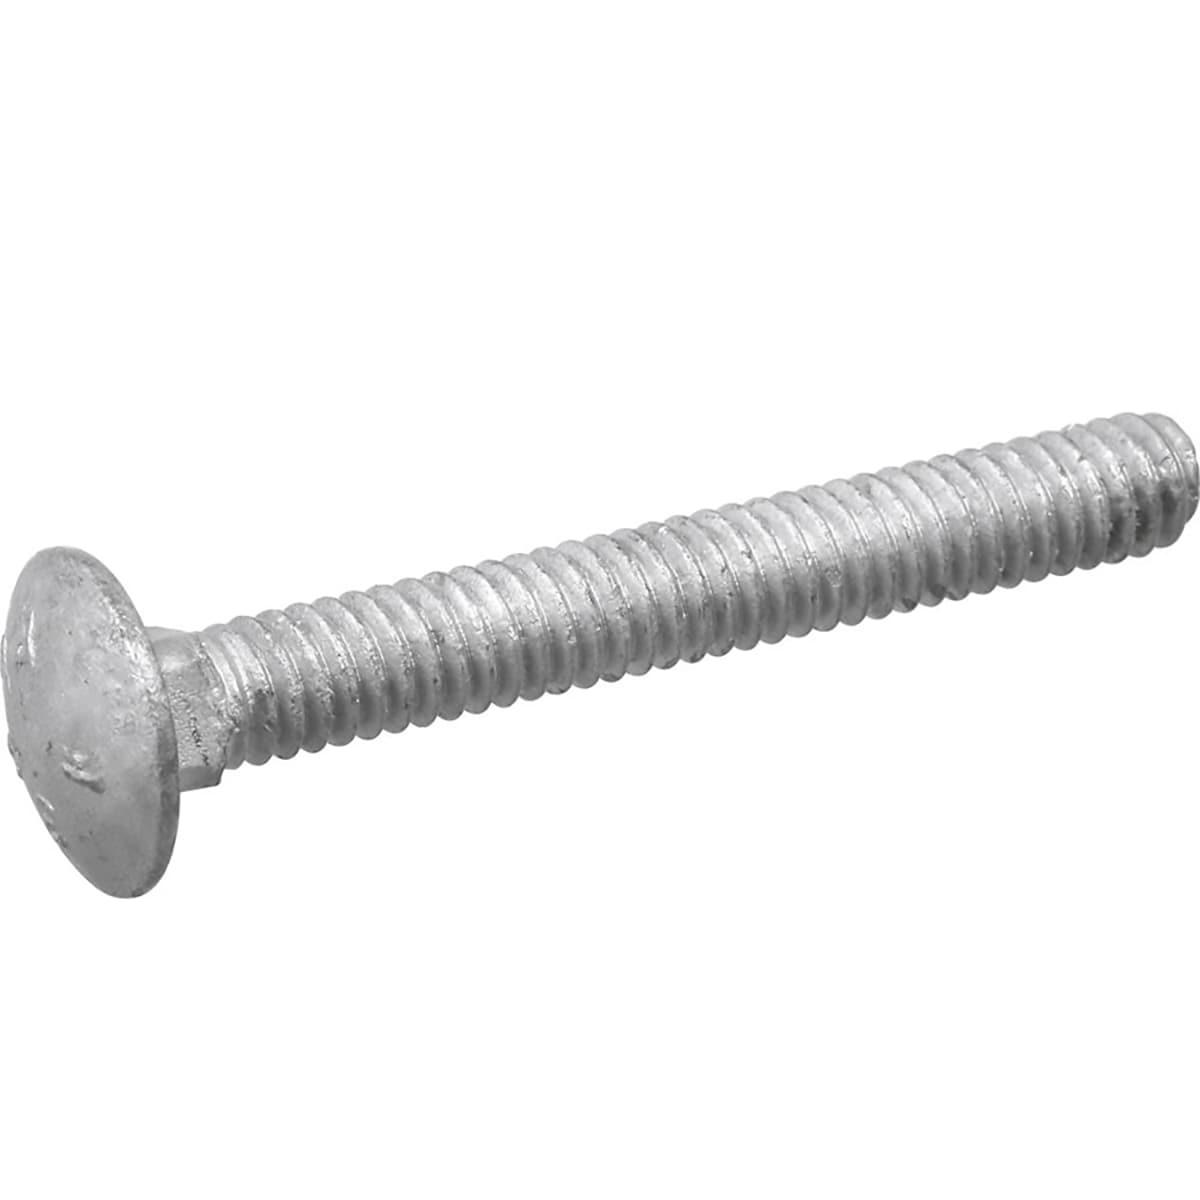 Carriage Bolt Hot Dipped Galvanized Qty-100 3/8-16 x 5 FT